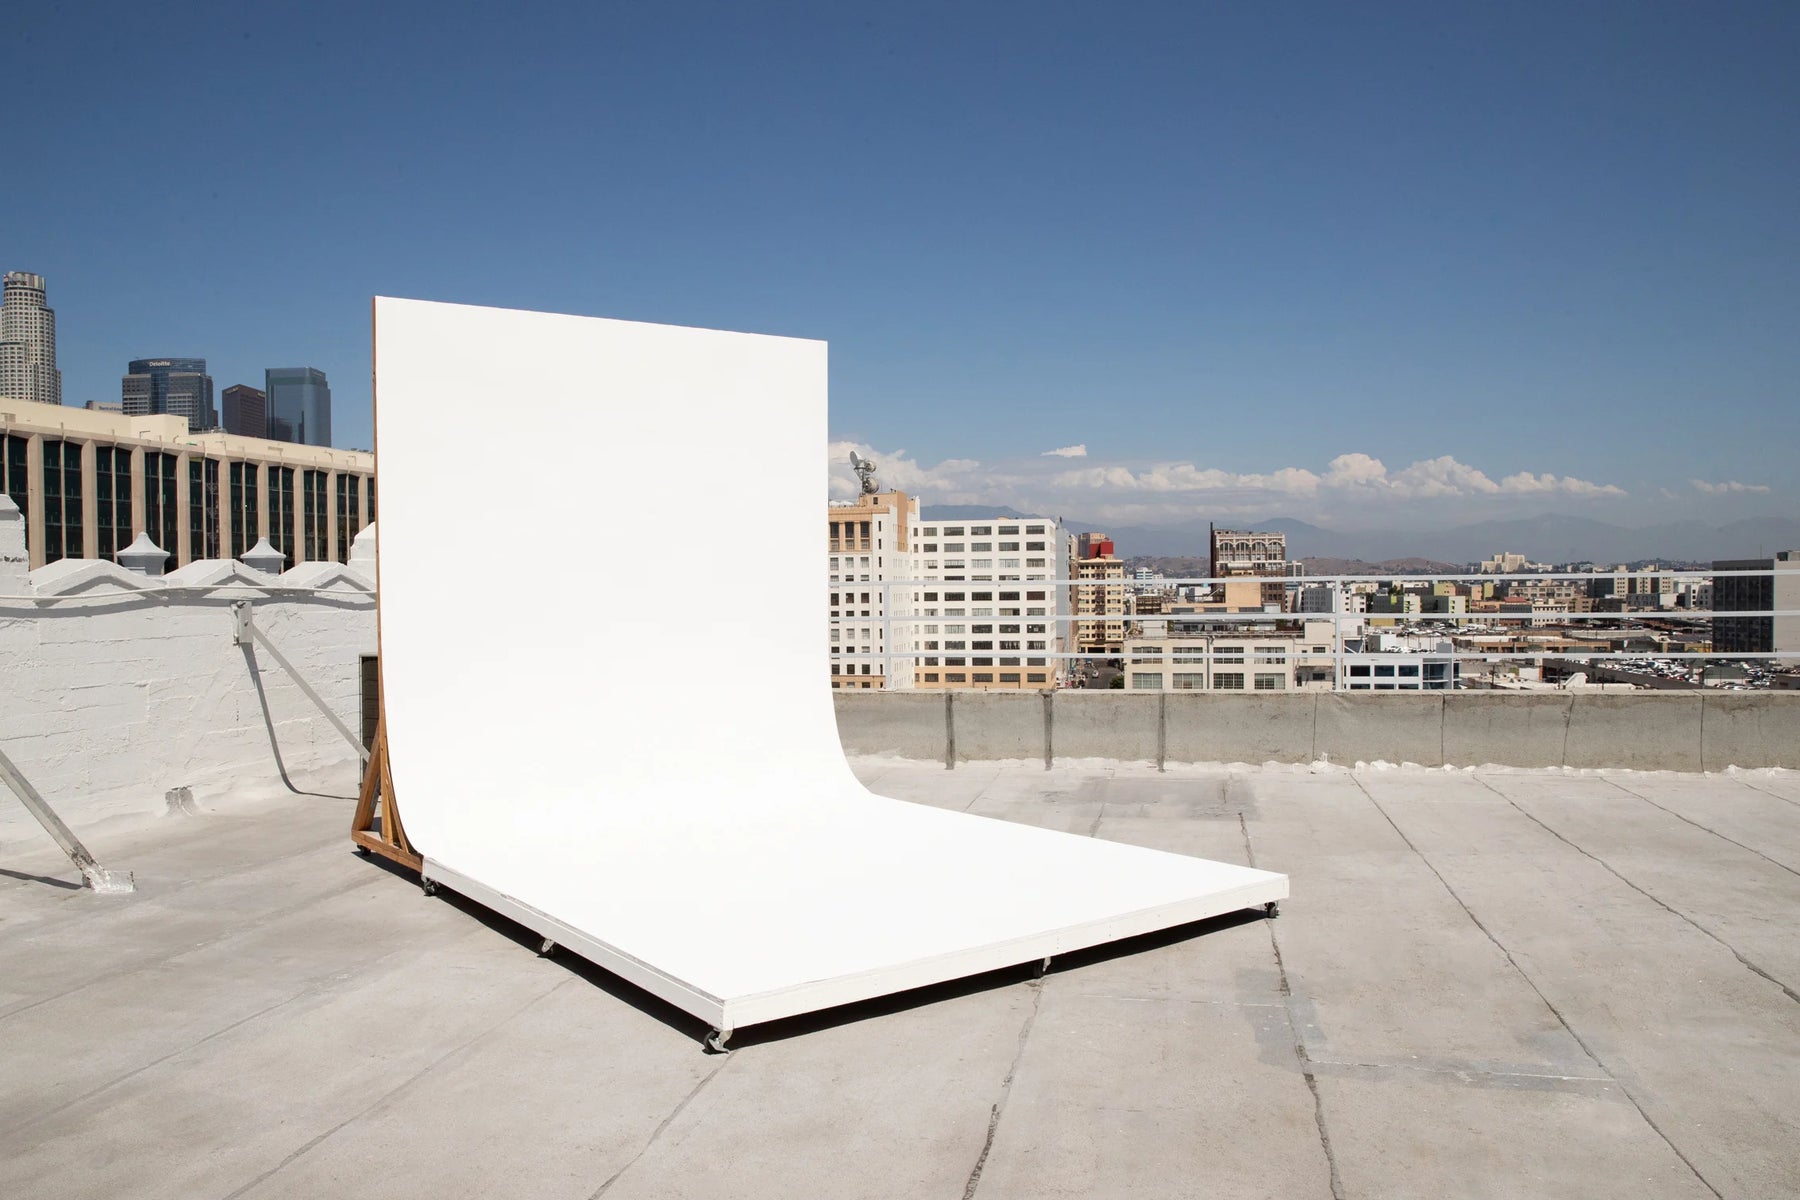 Rooftop A Cyclorama Wall Now Available!